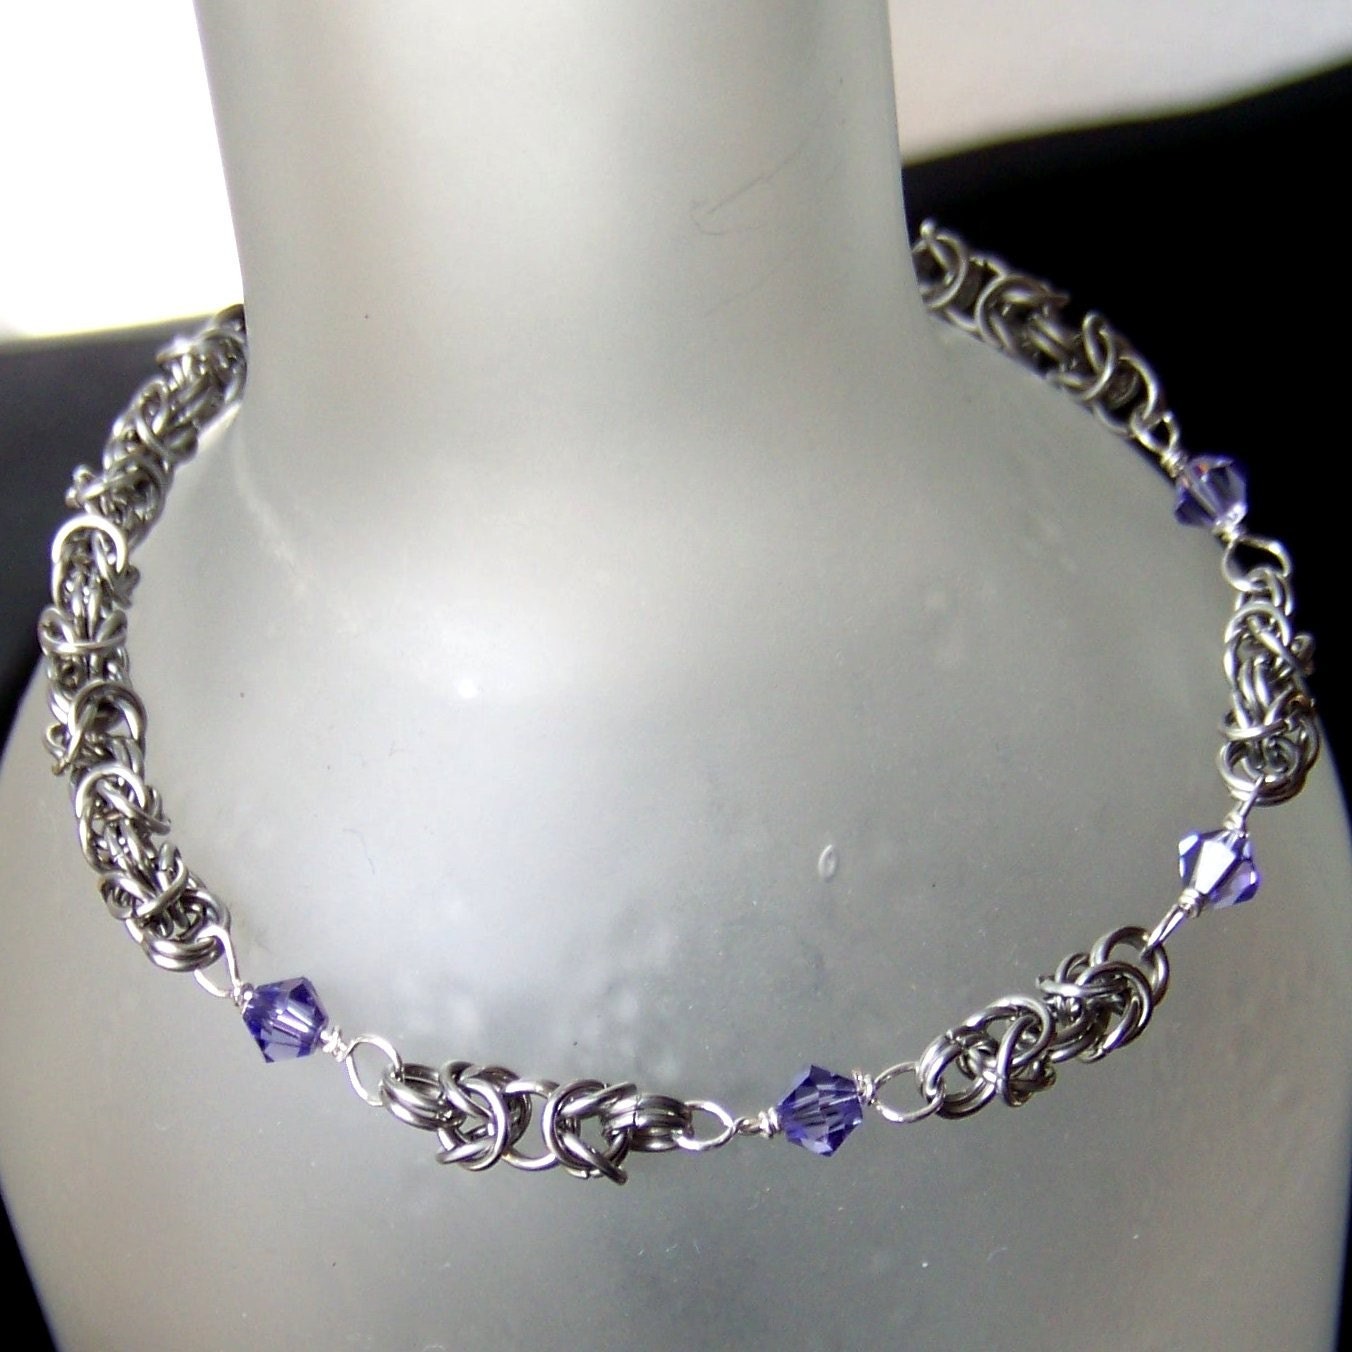 Silver and Gray Niobium Dragonscale Chainmaille Bracelet